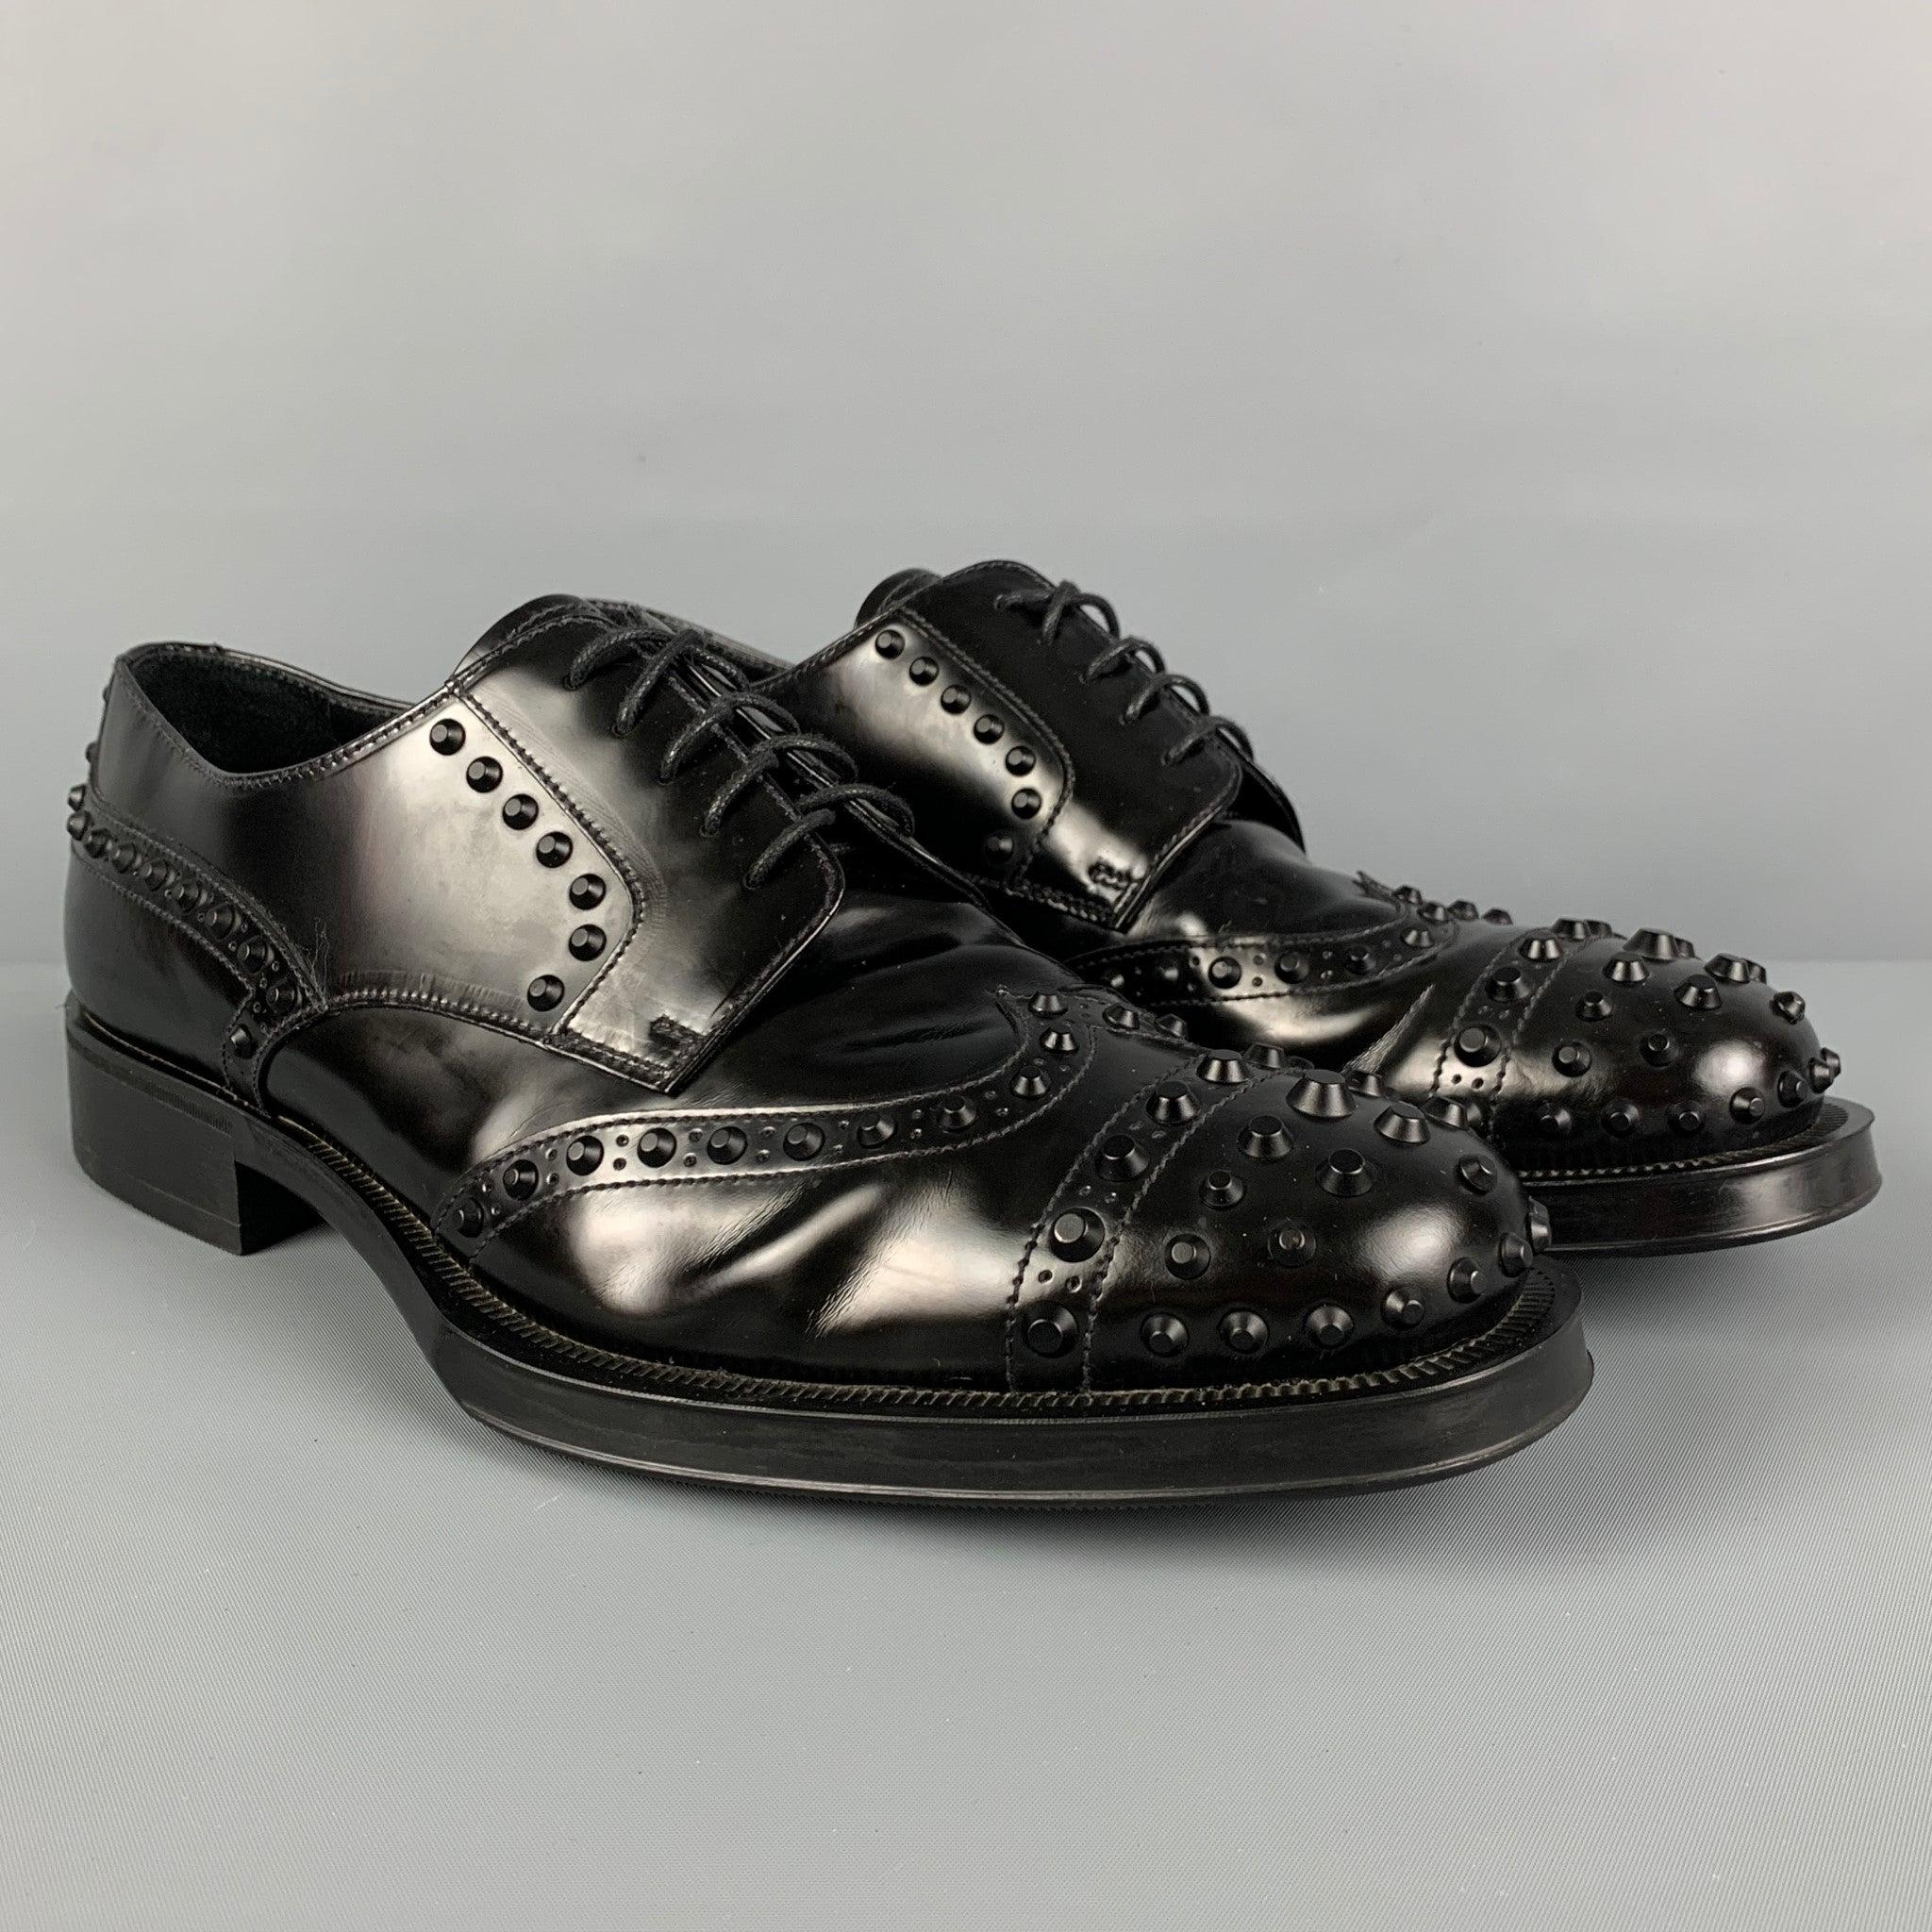 PRADA shoes comes in a black leather featuring studded details, cap toe, and a lace up closure. Made in Italy.
Very Good
Pre-Owned Condition. Light wear.  

Marked:   2EE289 9.5Outsole: 12.25 inches  x 4.5 inches 
  
  
 
Reference: 117559
Category: